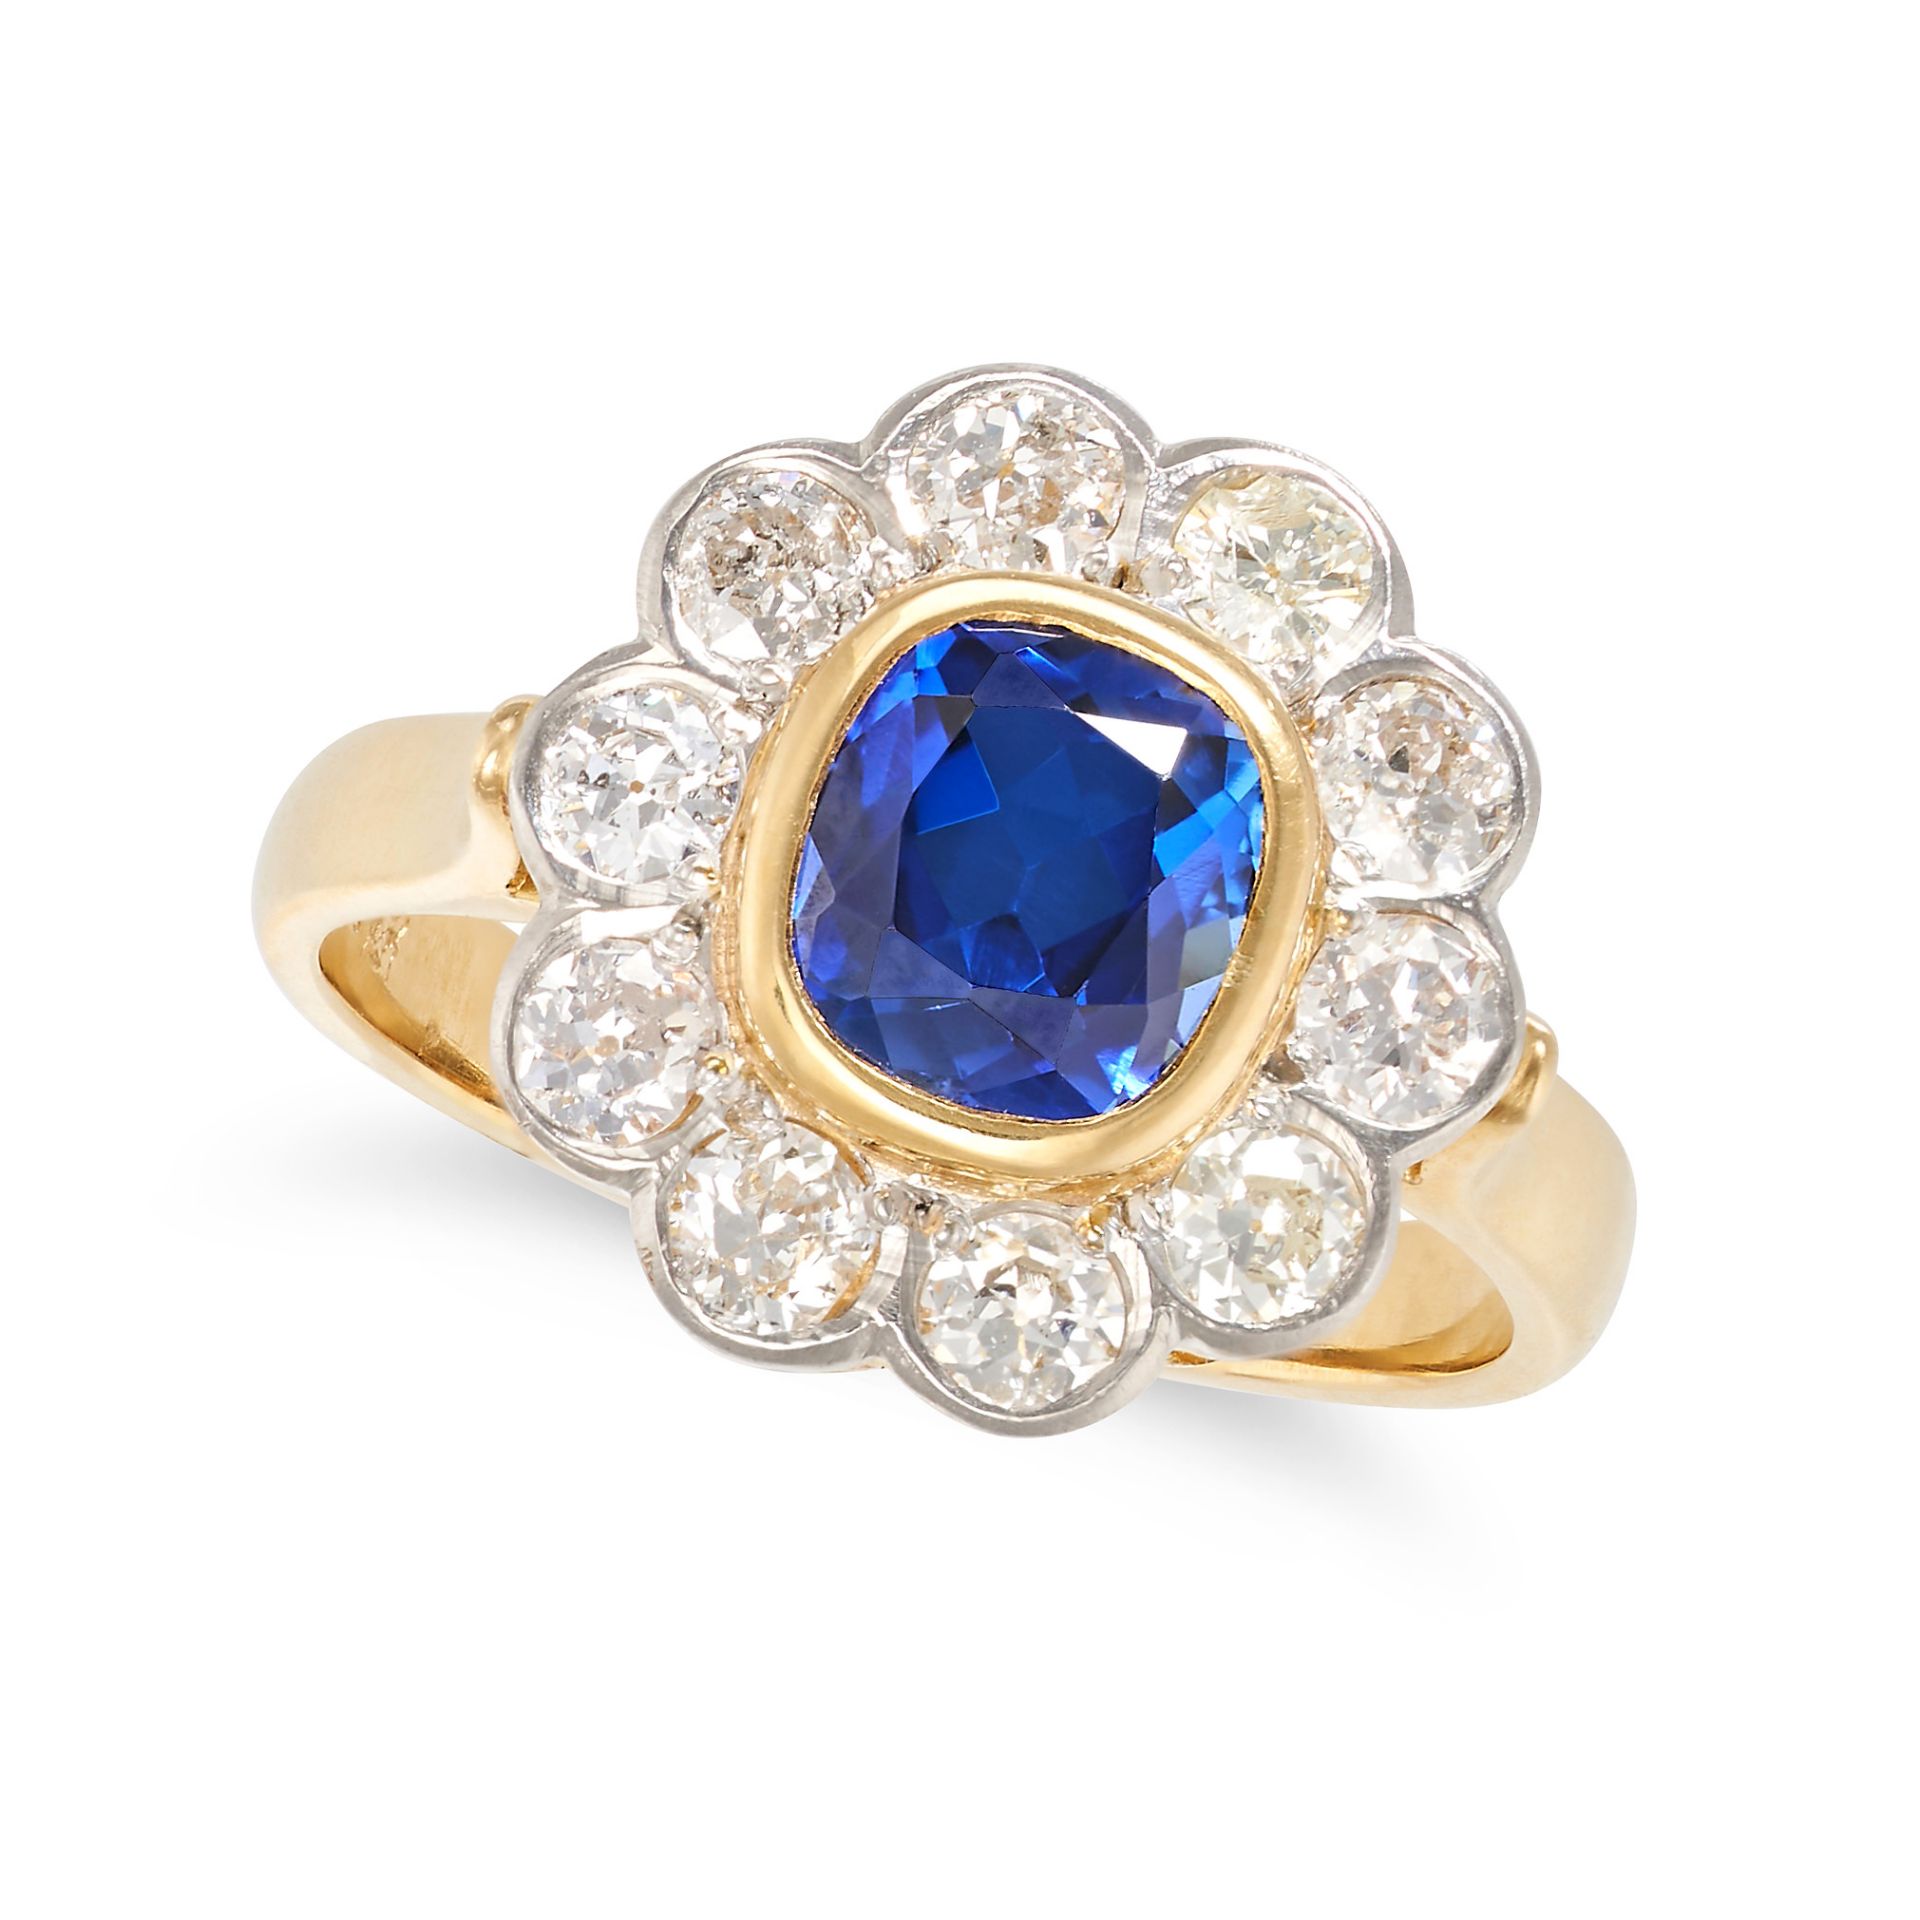 A SAPPHIRE AND DIAMOND CLUSTER RING in 18ct yellow gold and platinum, set with a cushion cut sapp...